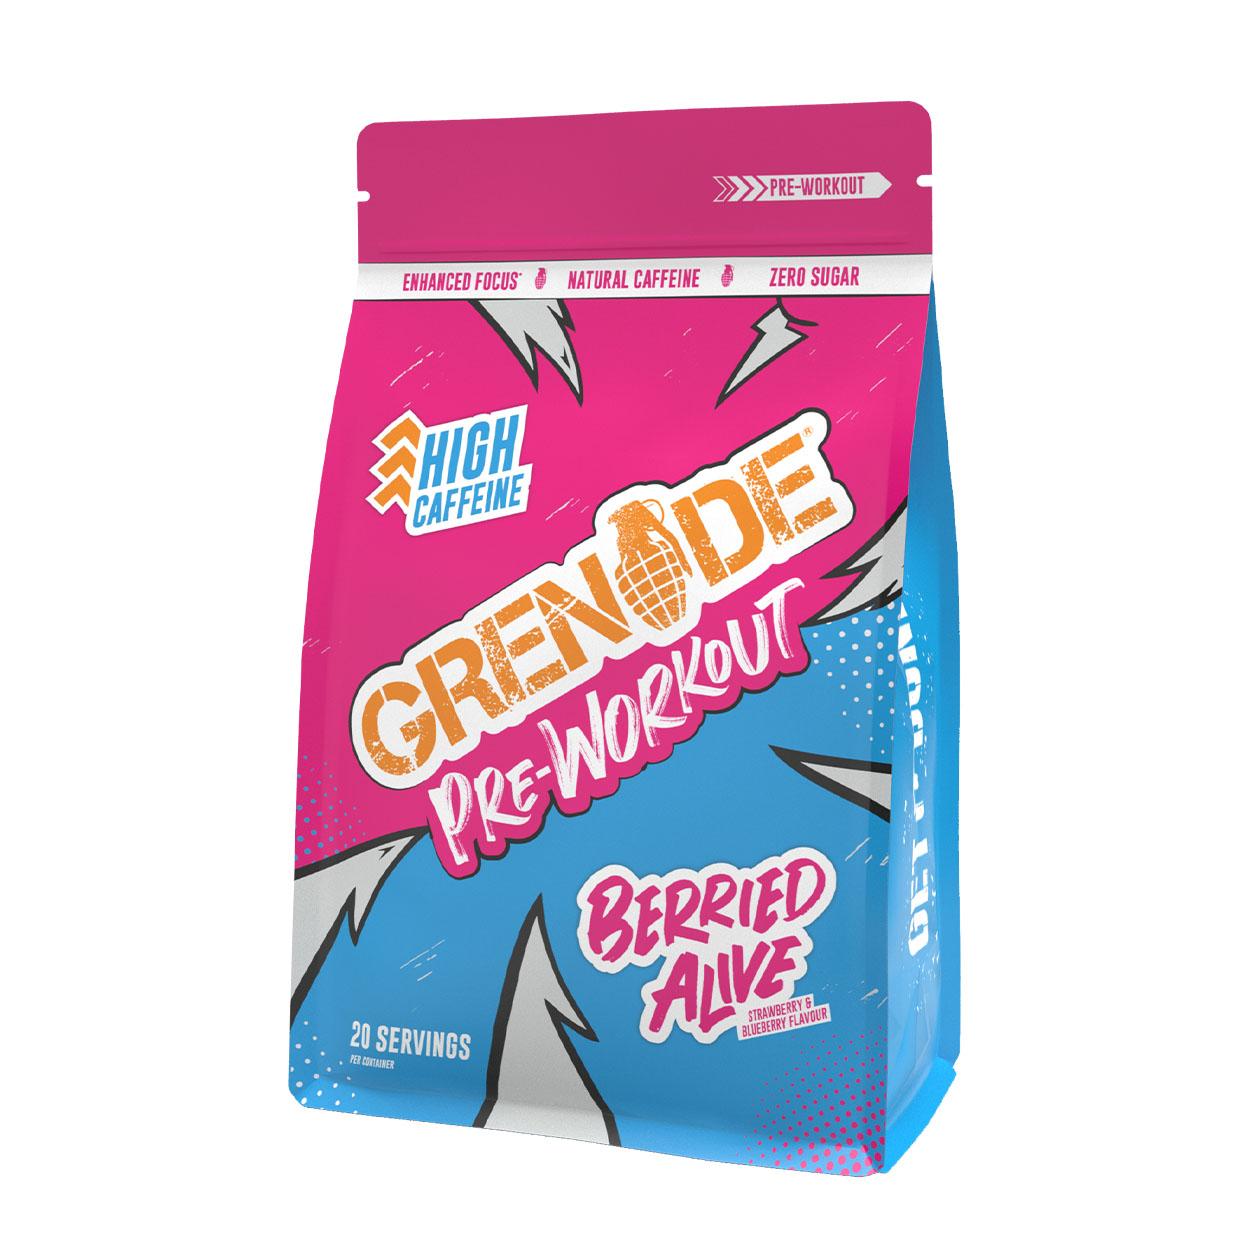 Pre Workout Berried Alive, 330 g, Grenade